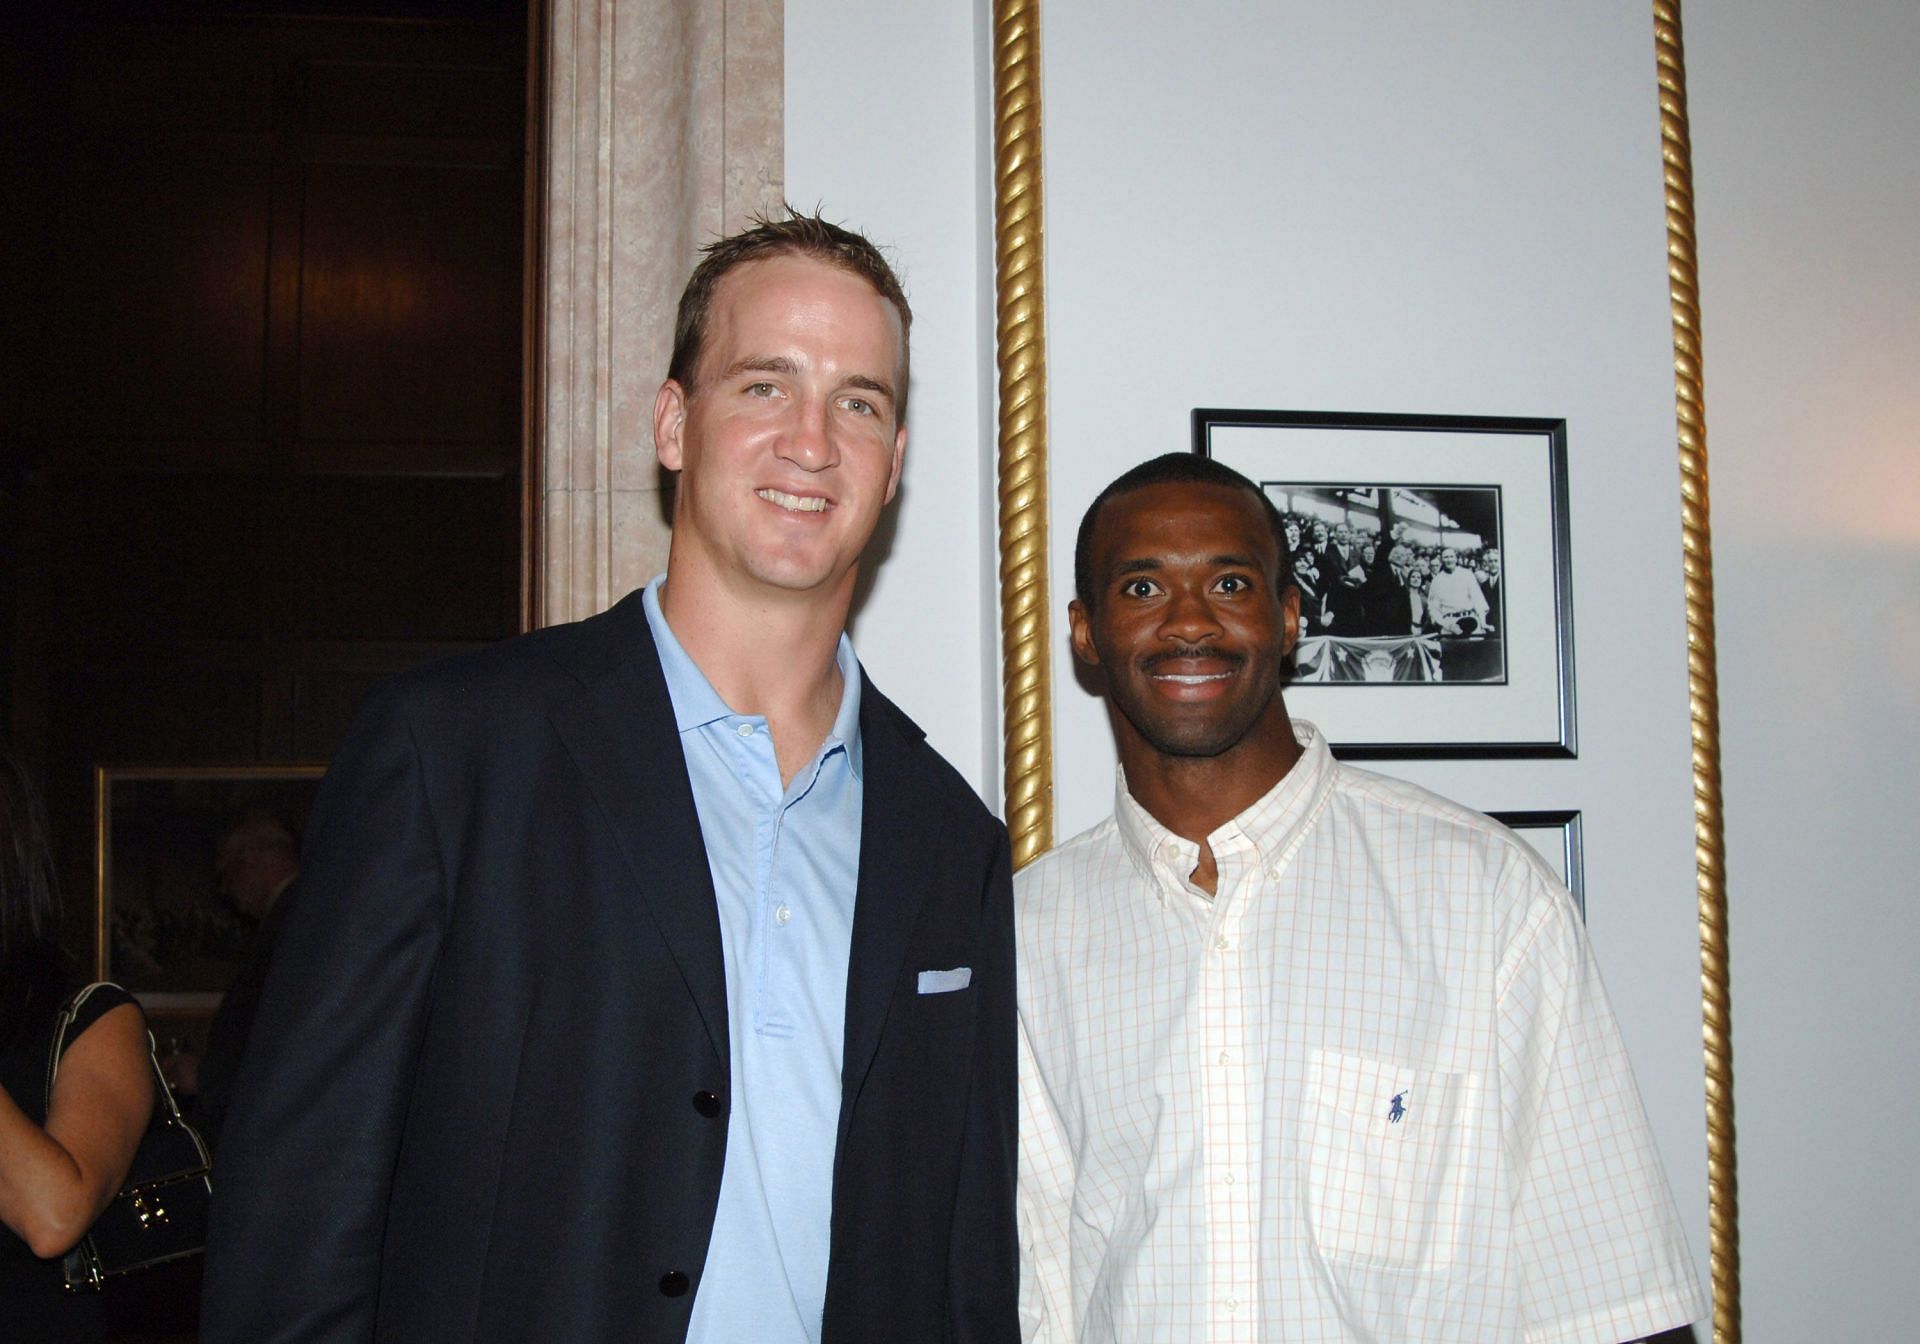 Peyton Manning and Marvin Harrison